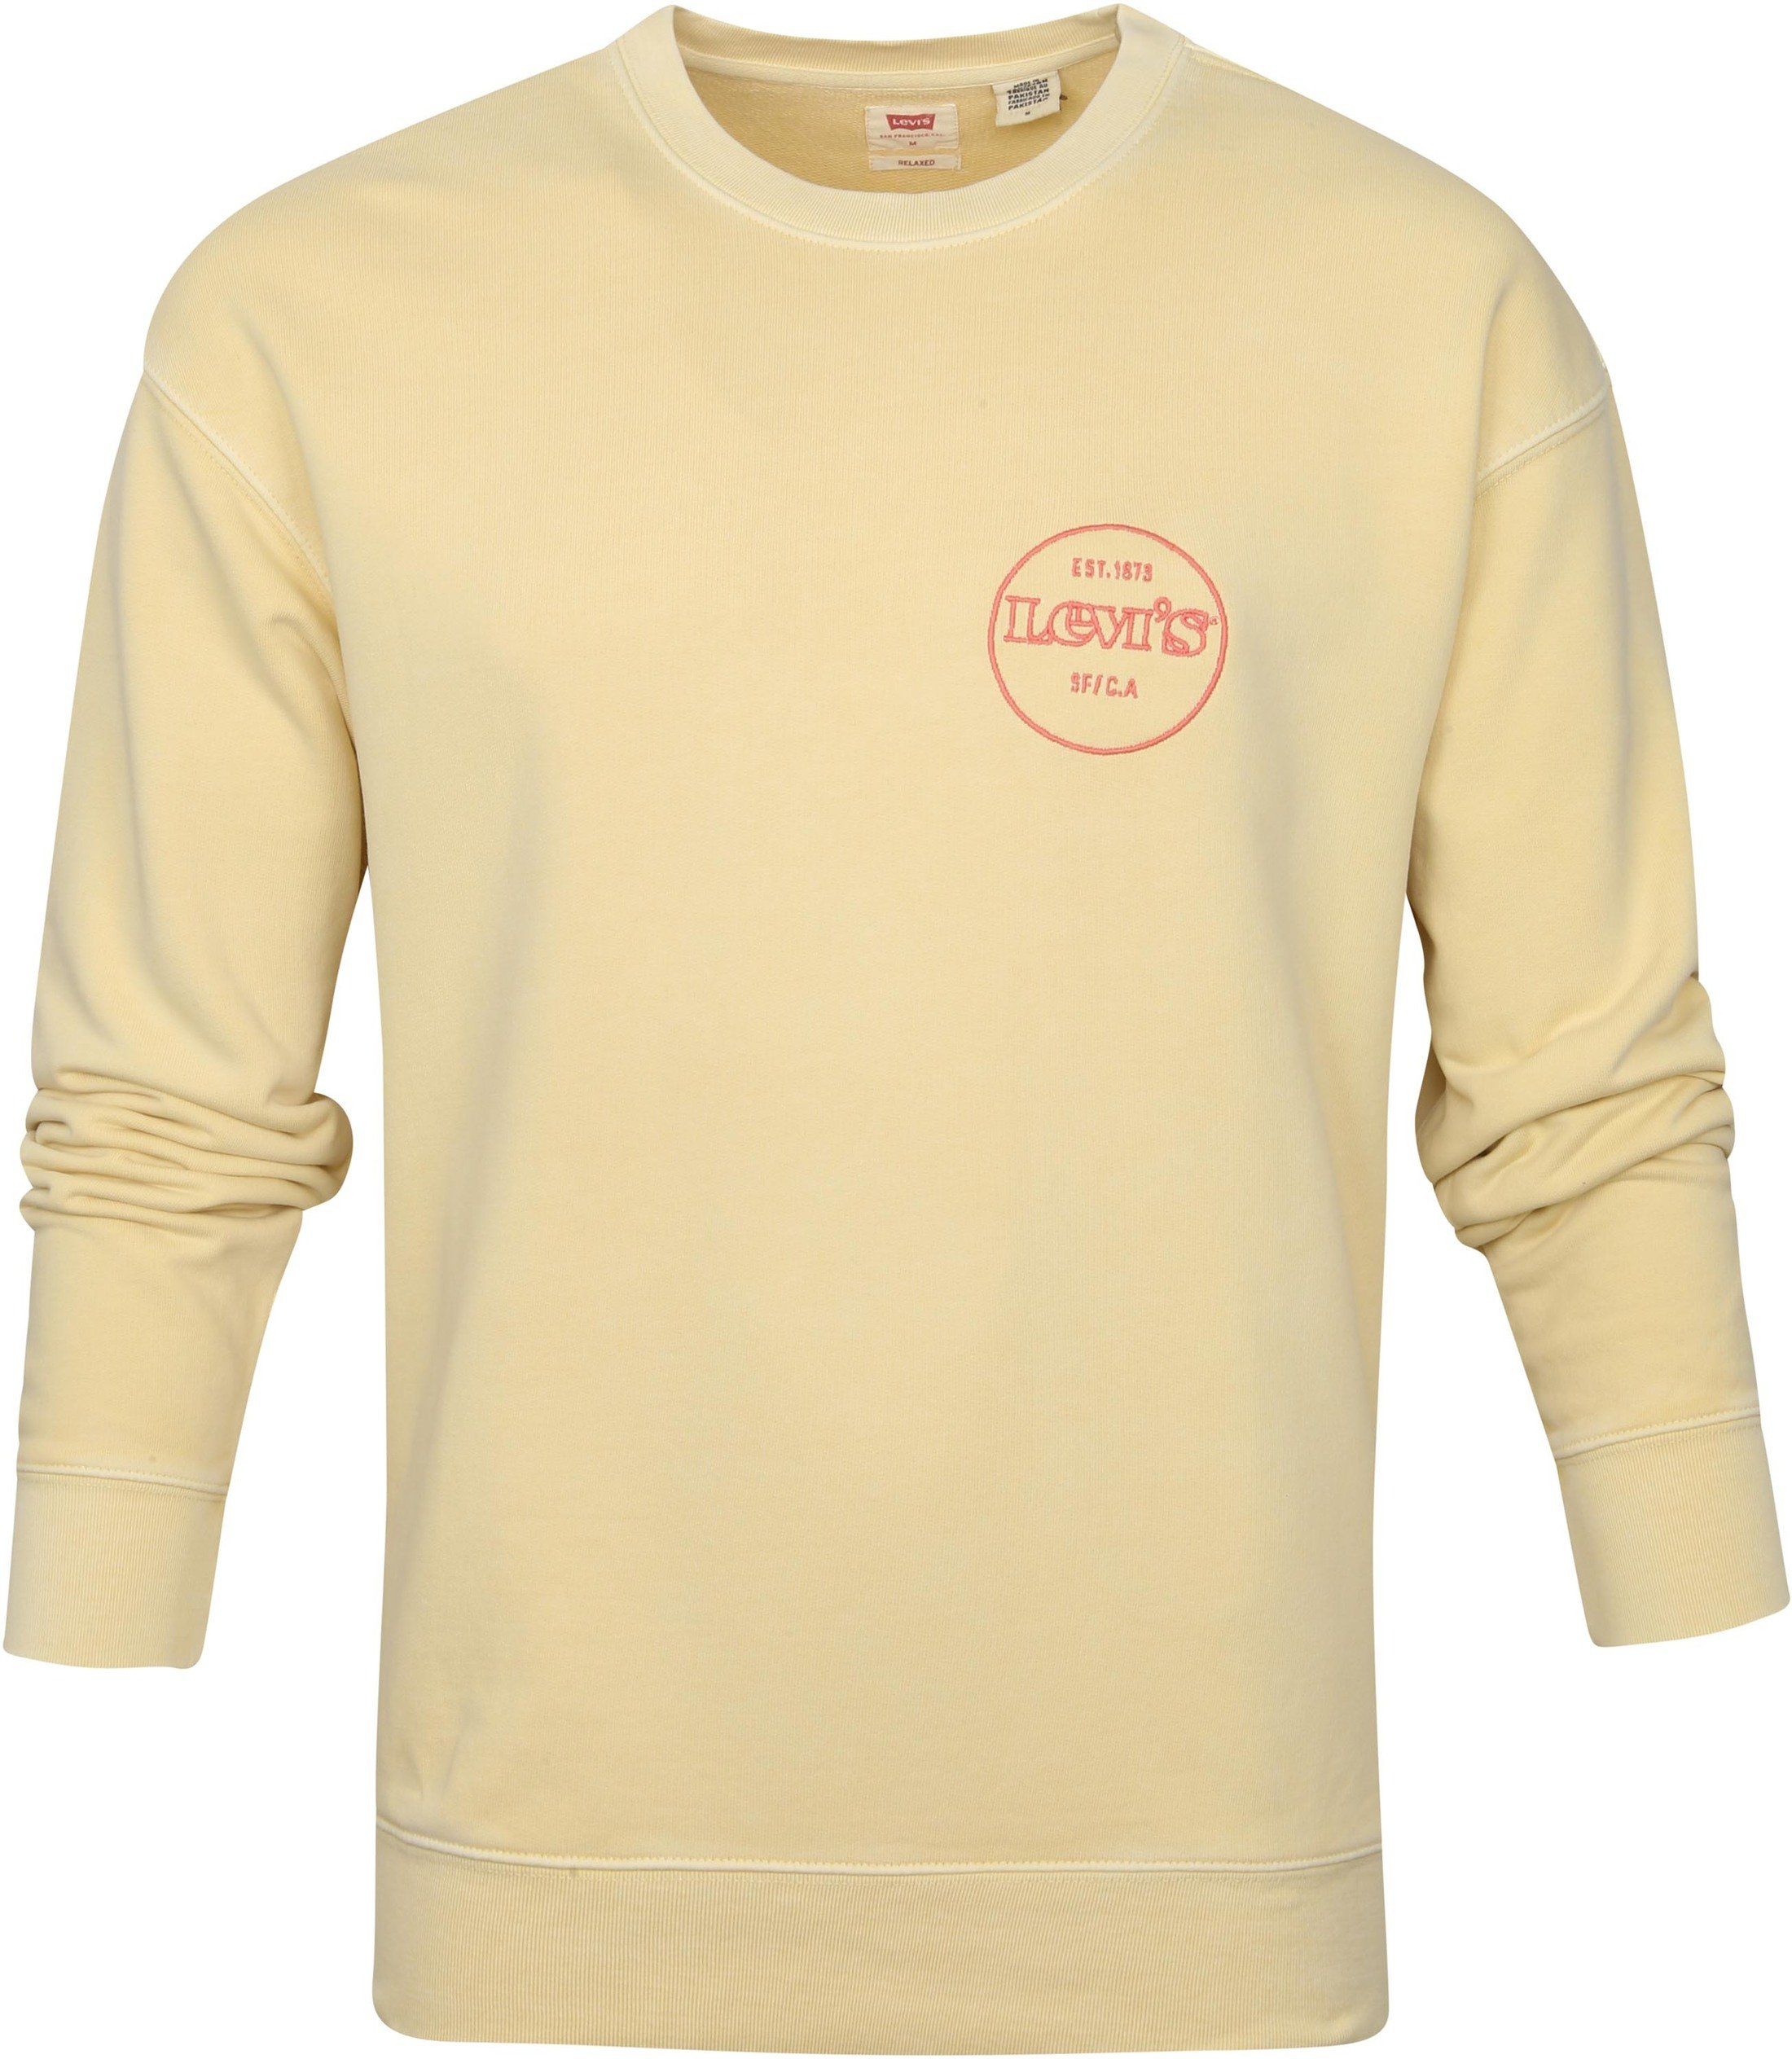 Levi's Sweater Graphic Logo Yellow size S